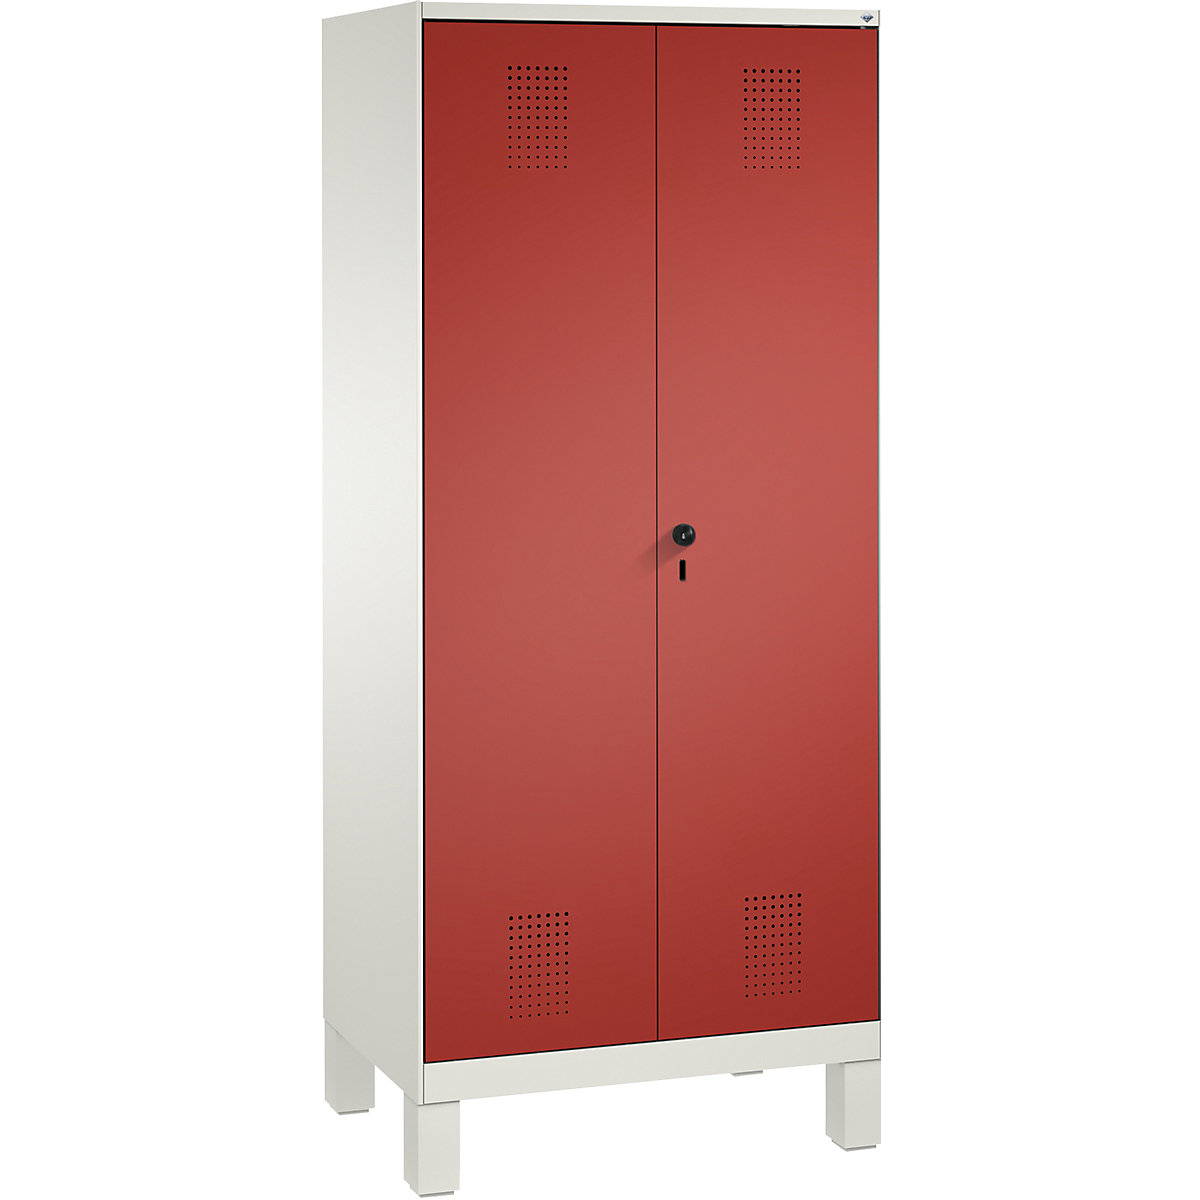 EVOLO cloakroom locker, doors close in the middle – C+P, 2 compartments, compartment width 400 mm, with feet, traffic white / flame red-5